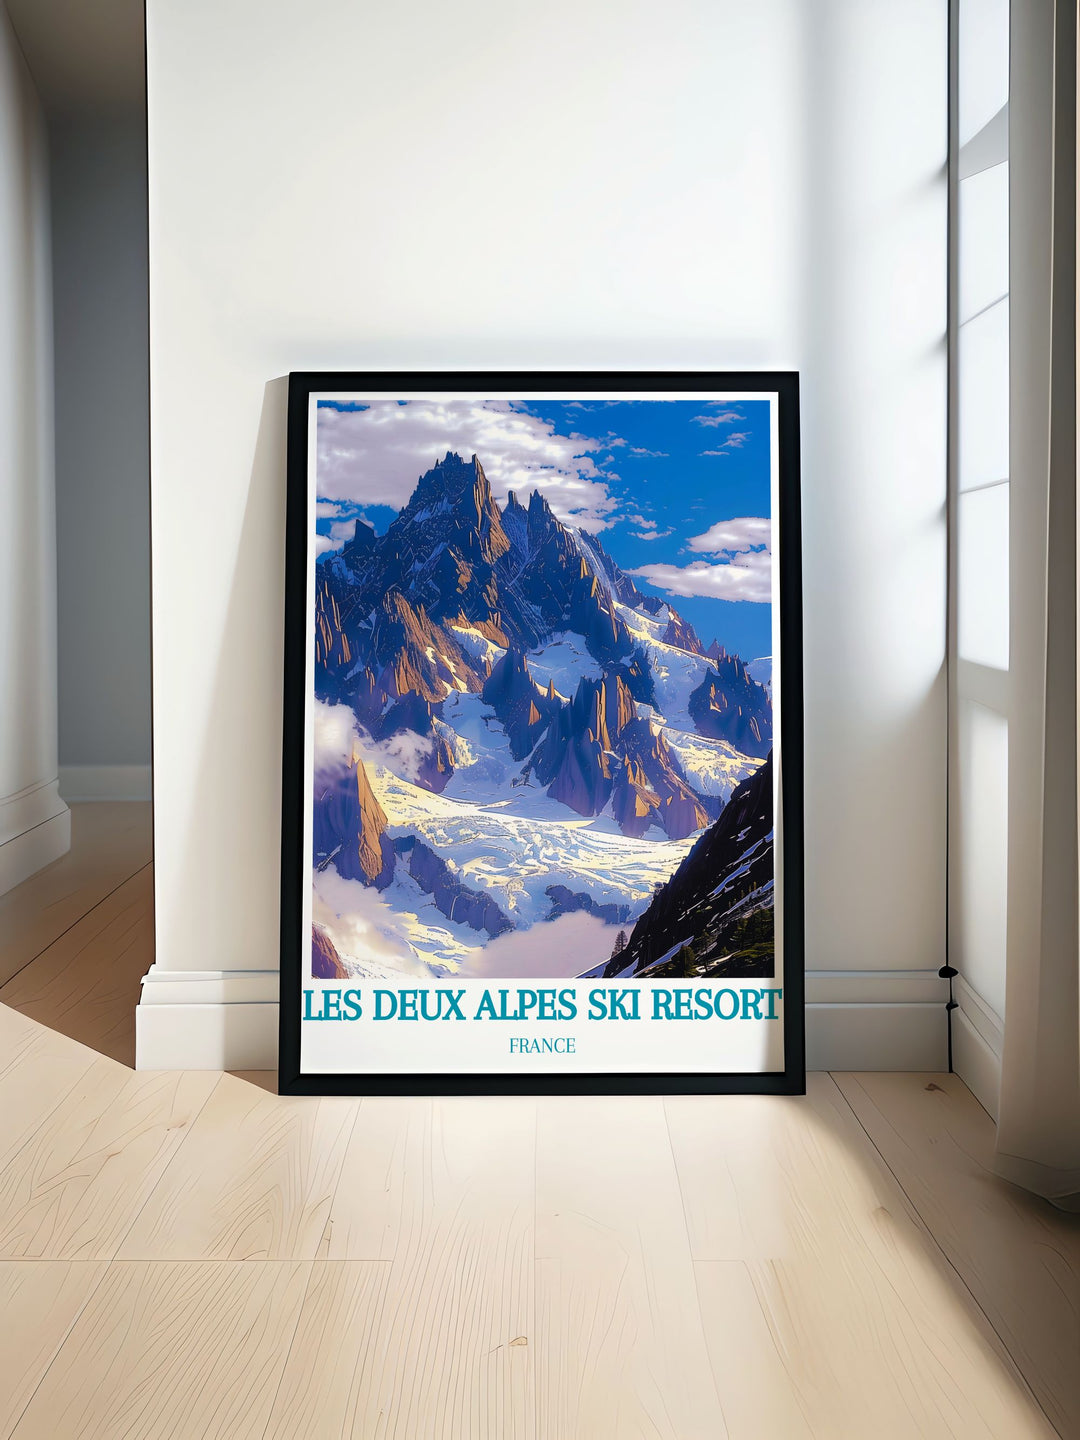 Experience the thrill of skiing in the French Alps with this detailed poster of Les Deux Alpes, capturing the resorts dynamic atmosphere and extensive pistes, perfect for your home decor.